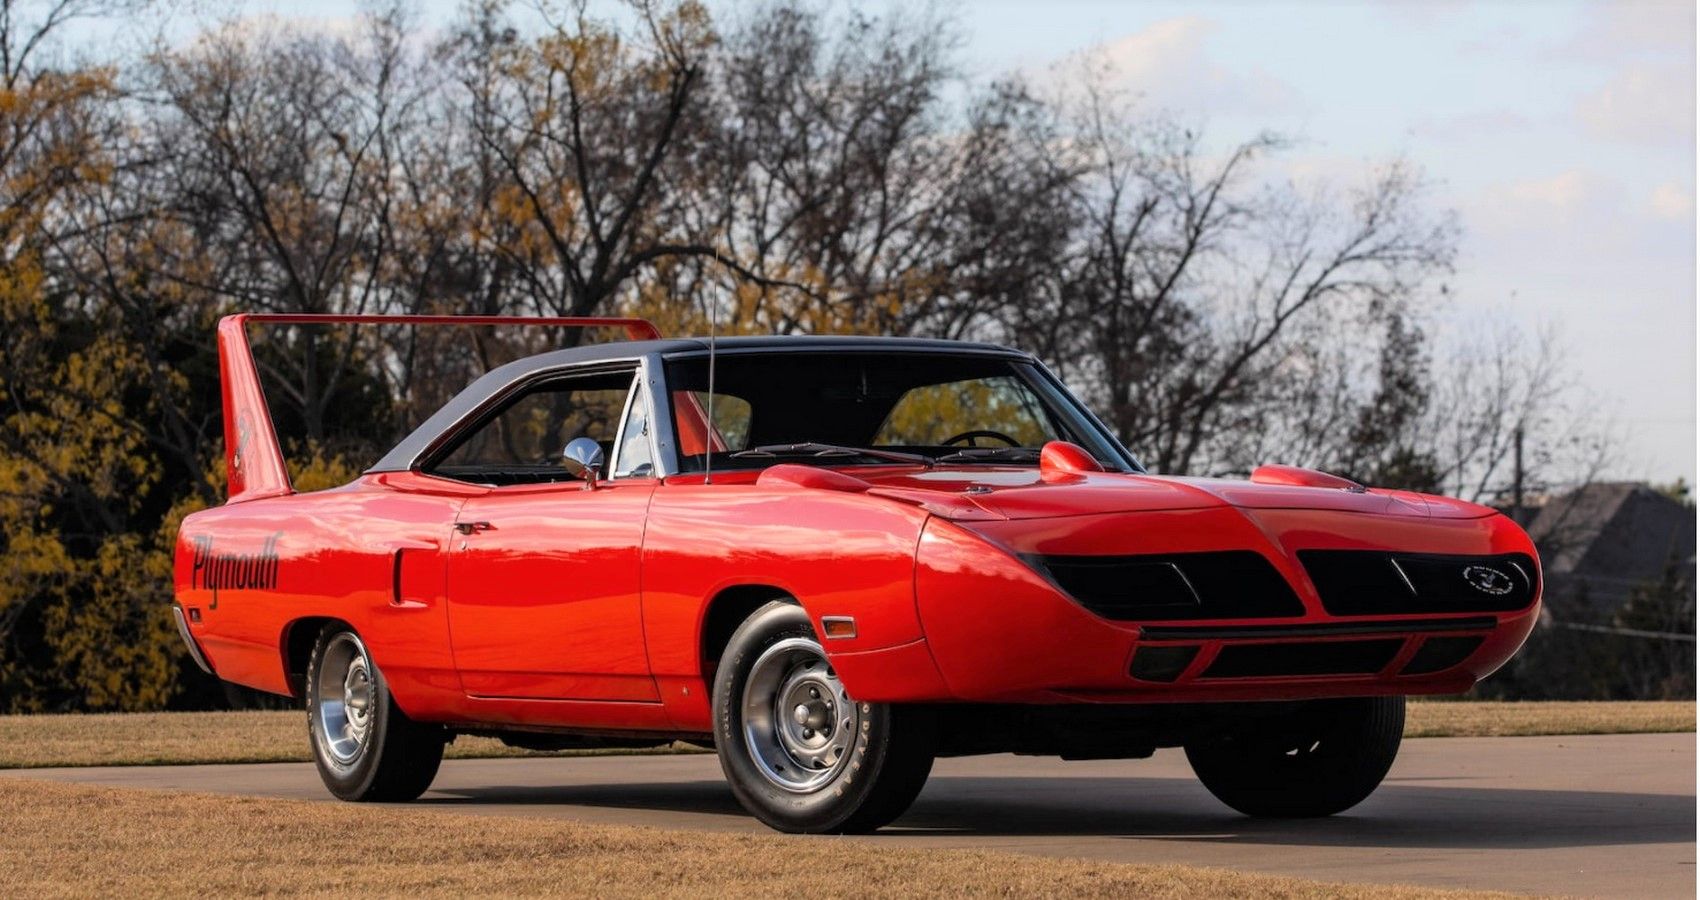 10 Overrated Classic Cars We Wouldn’t Waste Our Money On